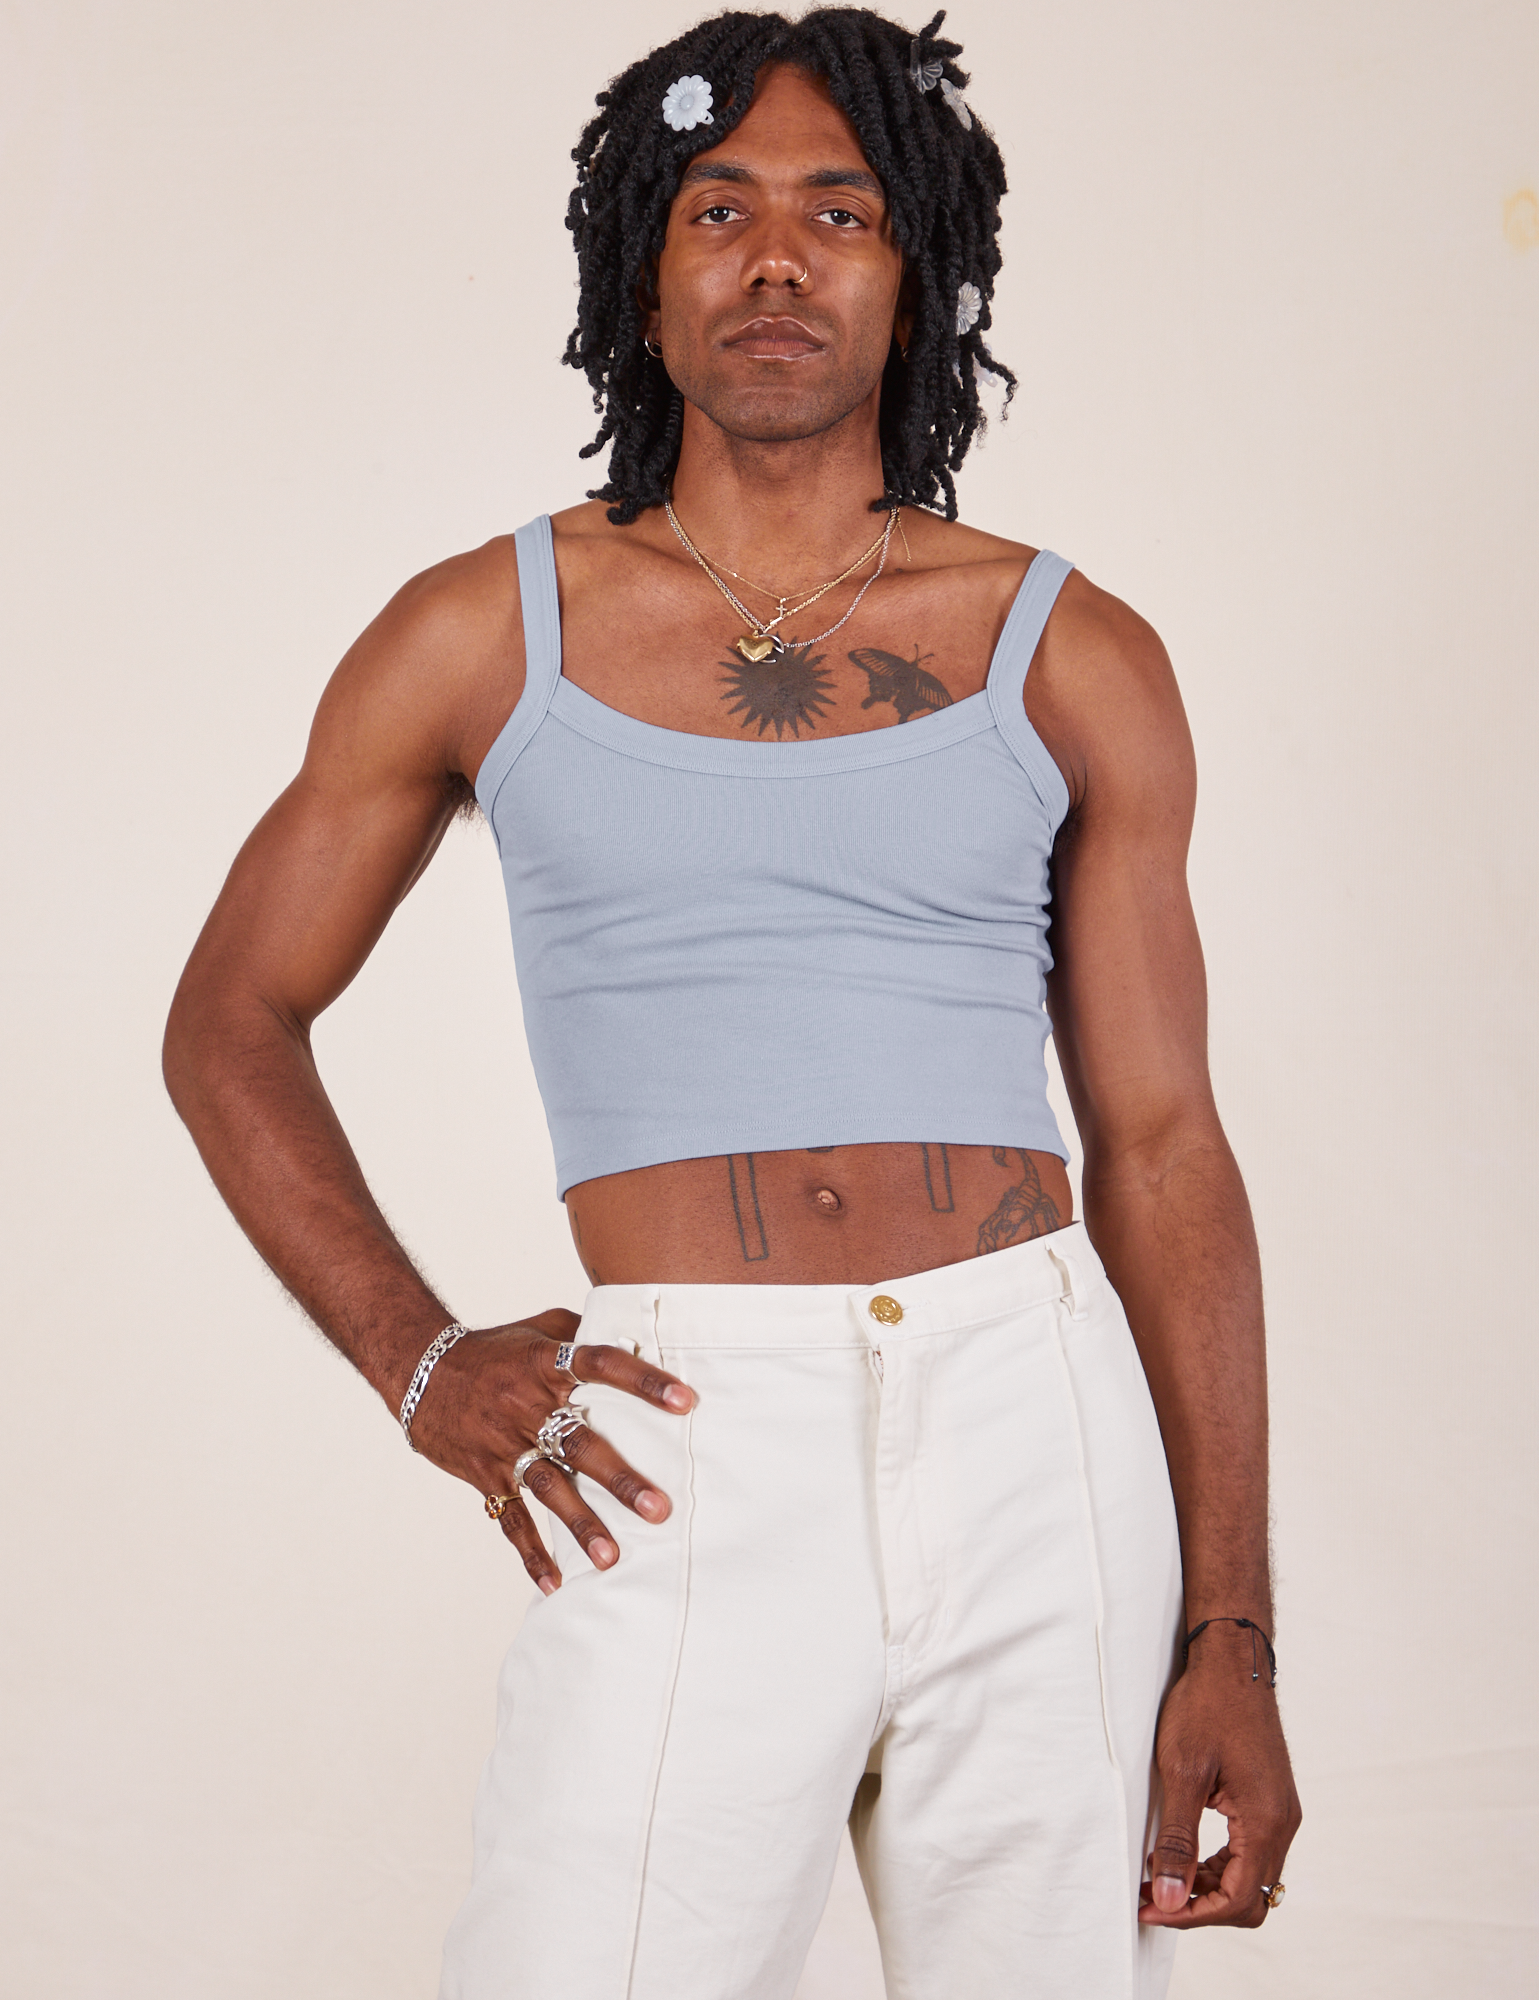 Jerrod is 6&#39;3&quot; and wearing S Cropped Cami in Periwinkle paired with vintage off-white Western pants